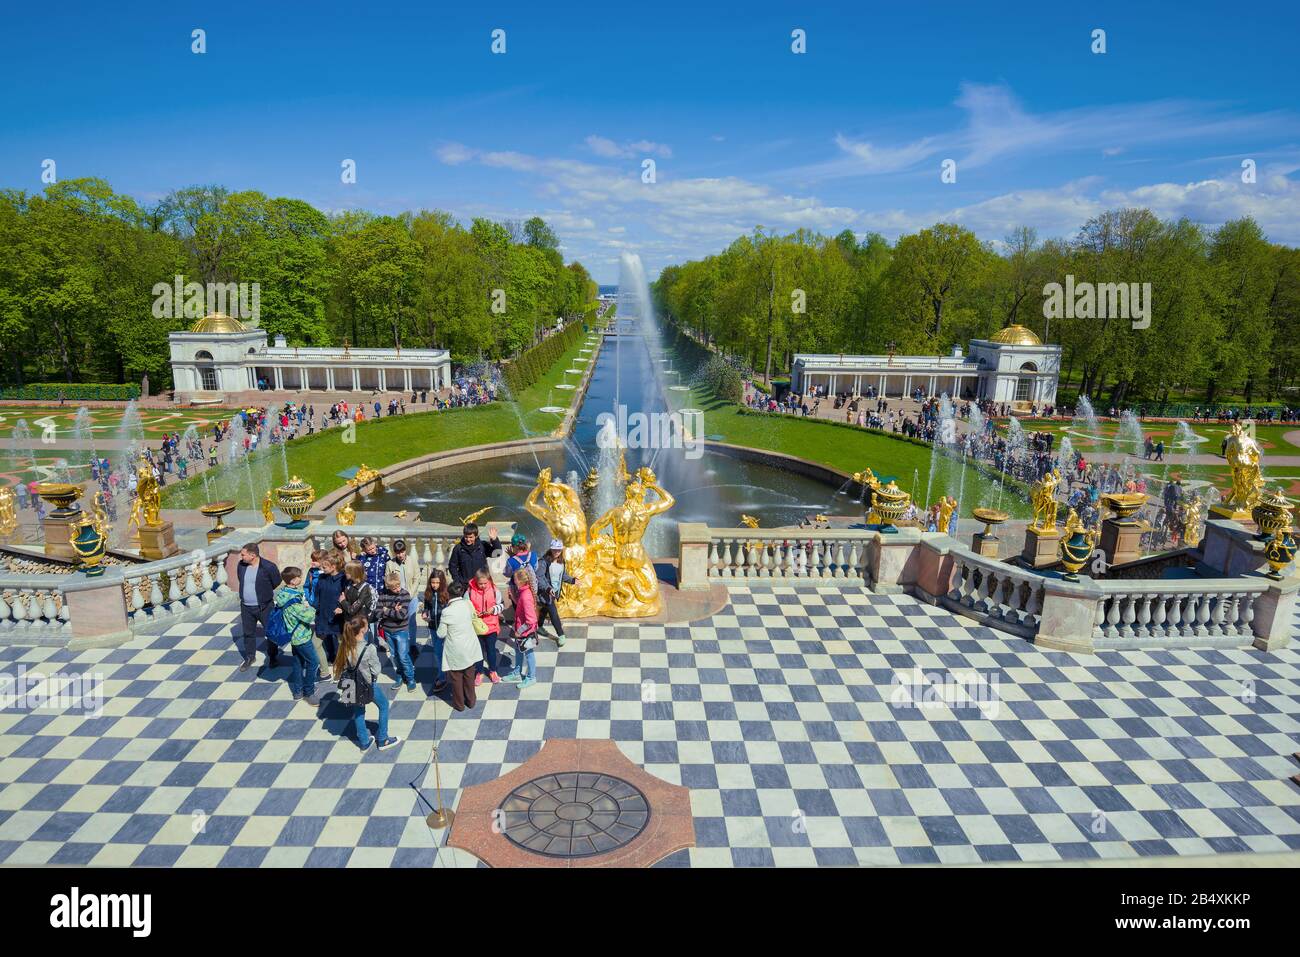 PETERHOF, RUSSIA - MAY 30, 2017: Excursion on the upper terrace of the Grand Cascade of the Peterhof Palace complex on a sunny May day. Stock Photo